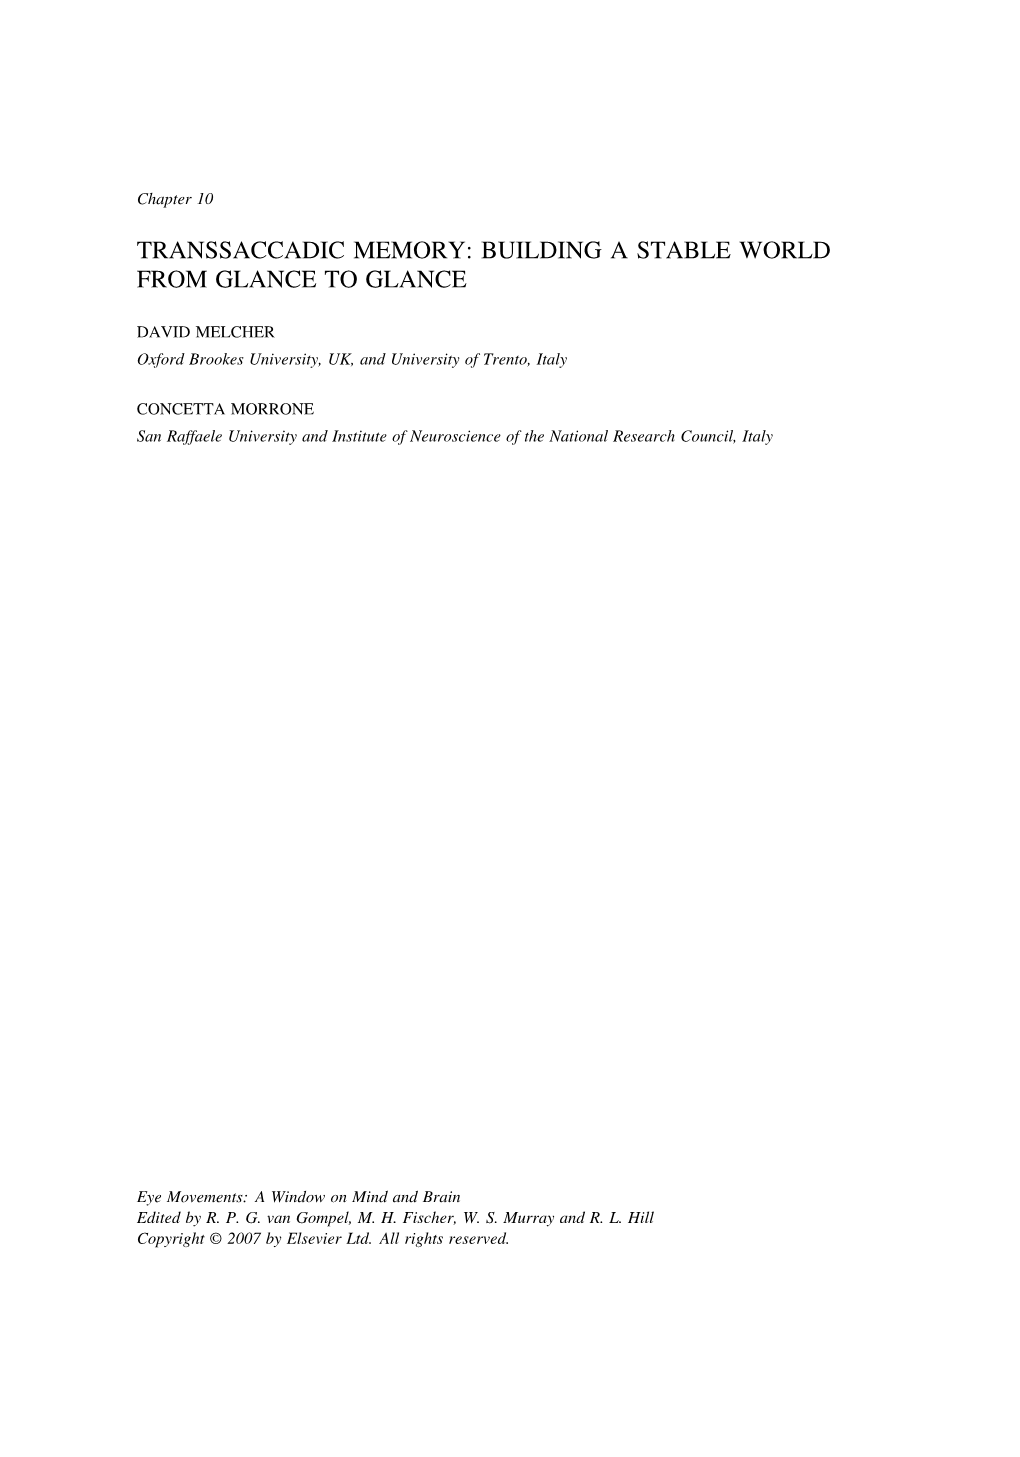 Transsaccadic Memory: Building a Stable World from Glance to Glance